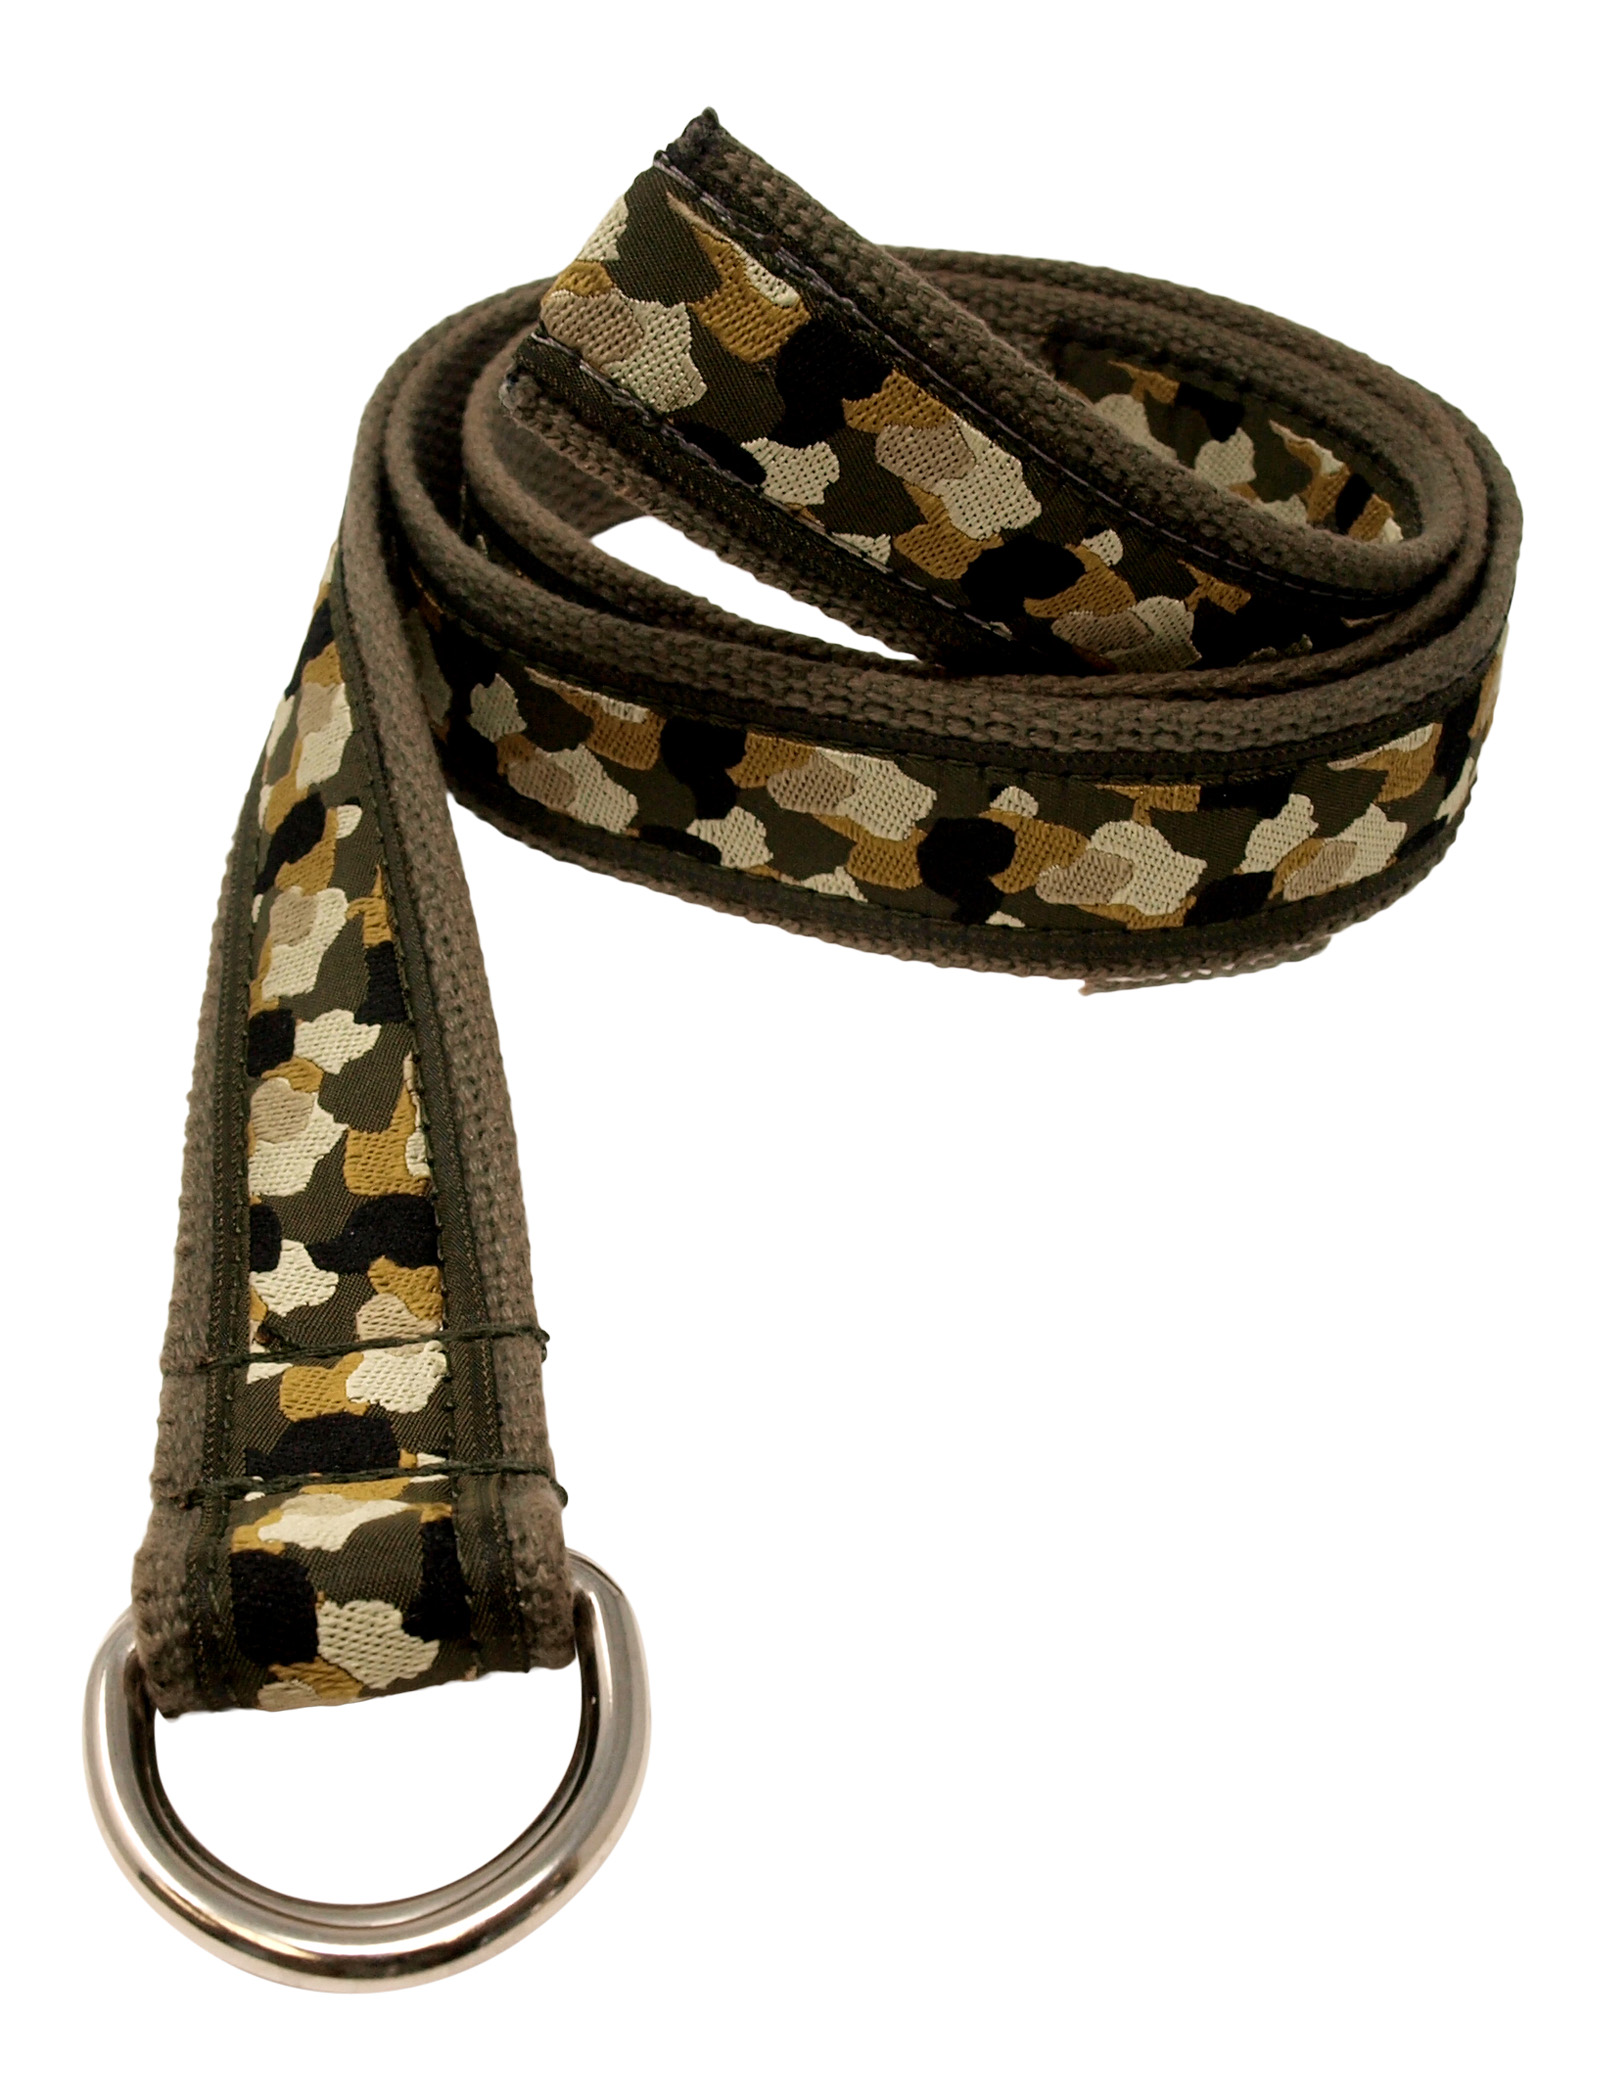 Camo D-Ring Belt with Silver or Brass D-Ring